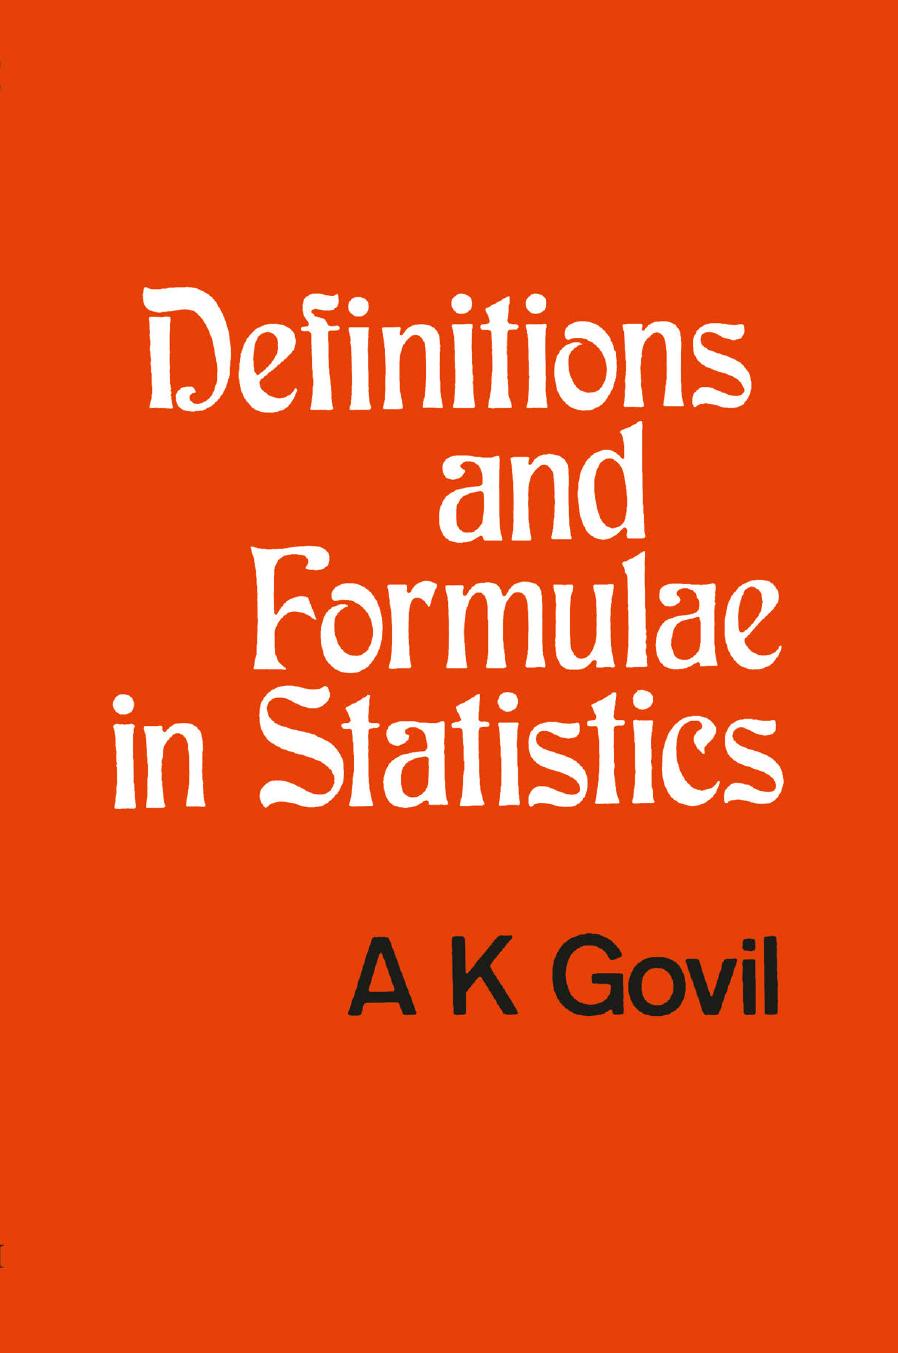 Definitions and Formulae in Statistics